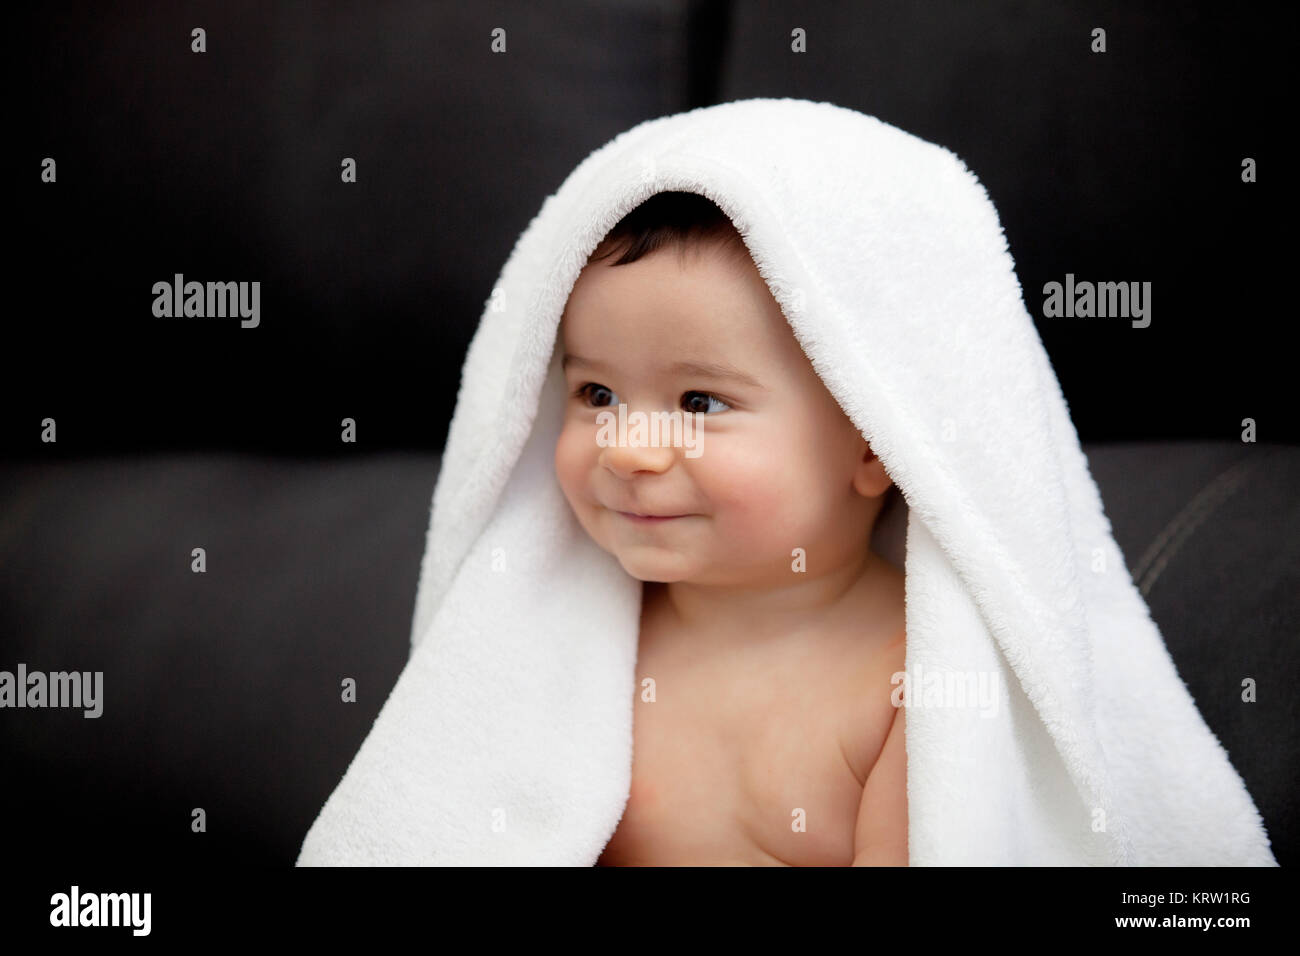 Adorable Baby Covered With A Towel Stock Photo Alamy